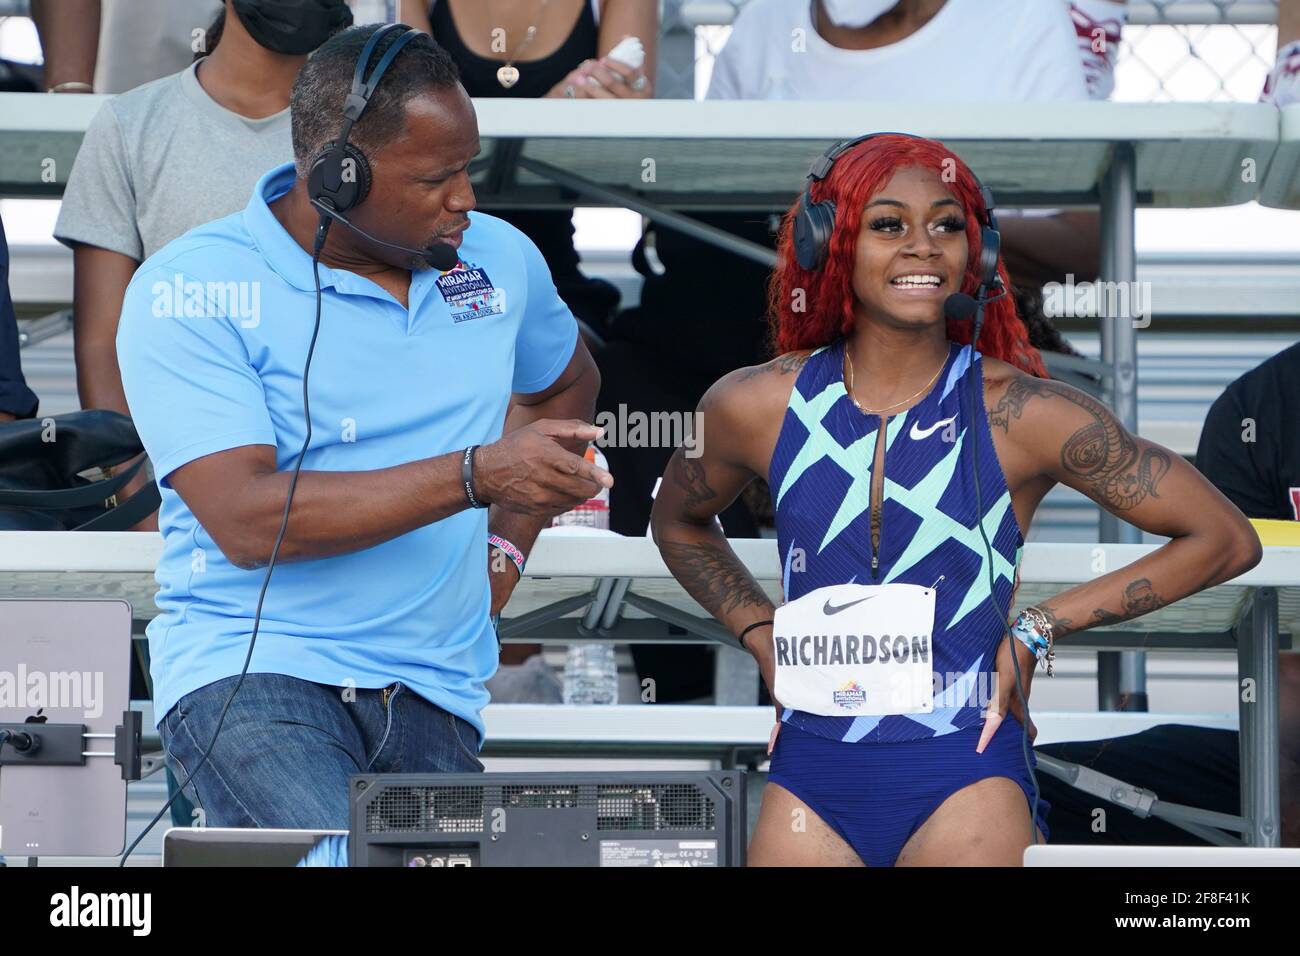 Sha'Carri Richardson (USA), right, is interviewed by NBC Sports broadcasters Ato Boldon after winning the women's 100m in 10.72  during the Miramar In Stock Photo